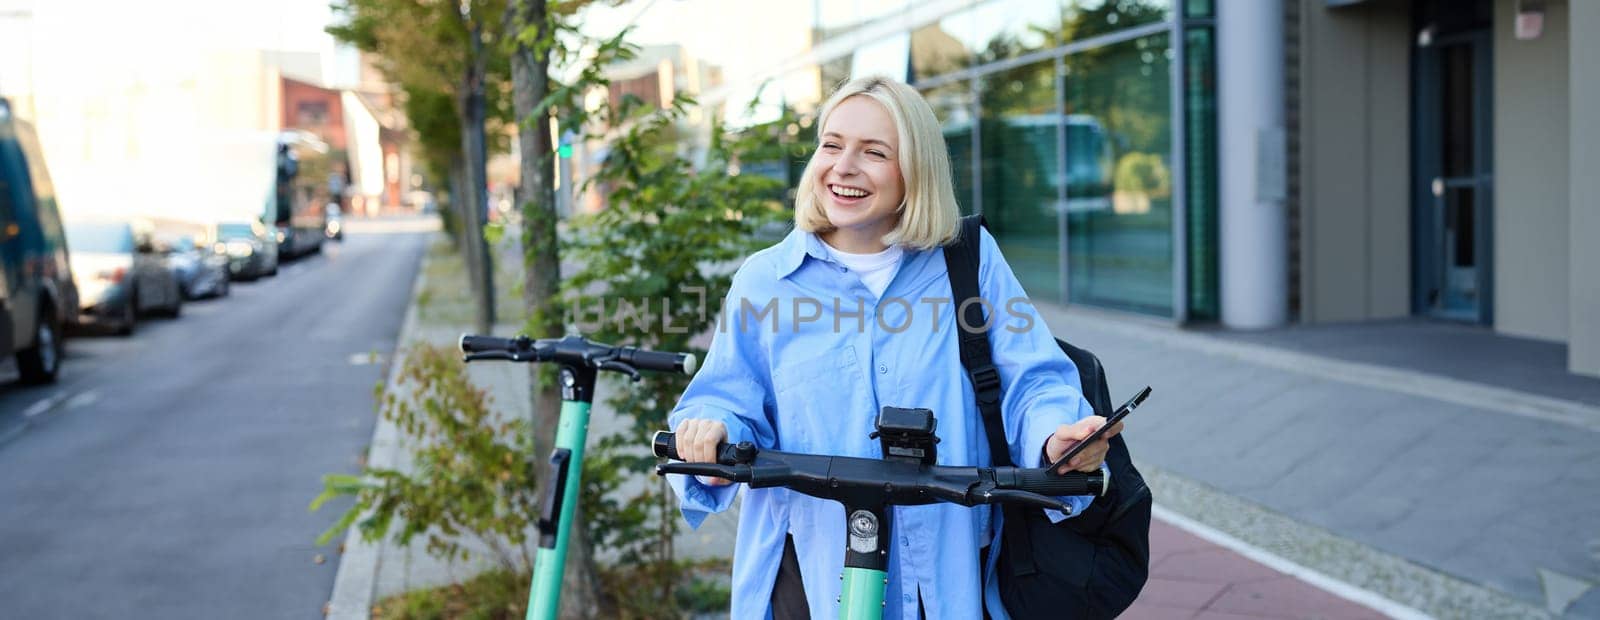 Portrait of smiling blond woman, college student using smartphone app to scan QR code on green electric scooter on street, renting a ride by Benzoix